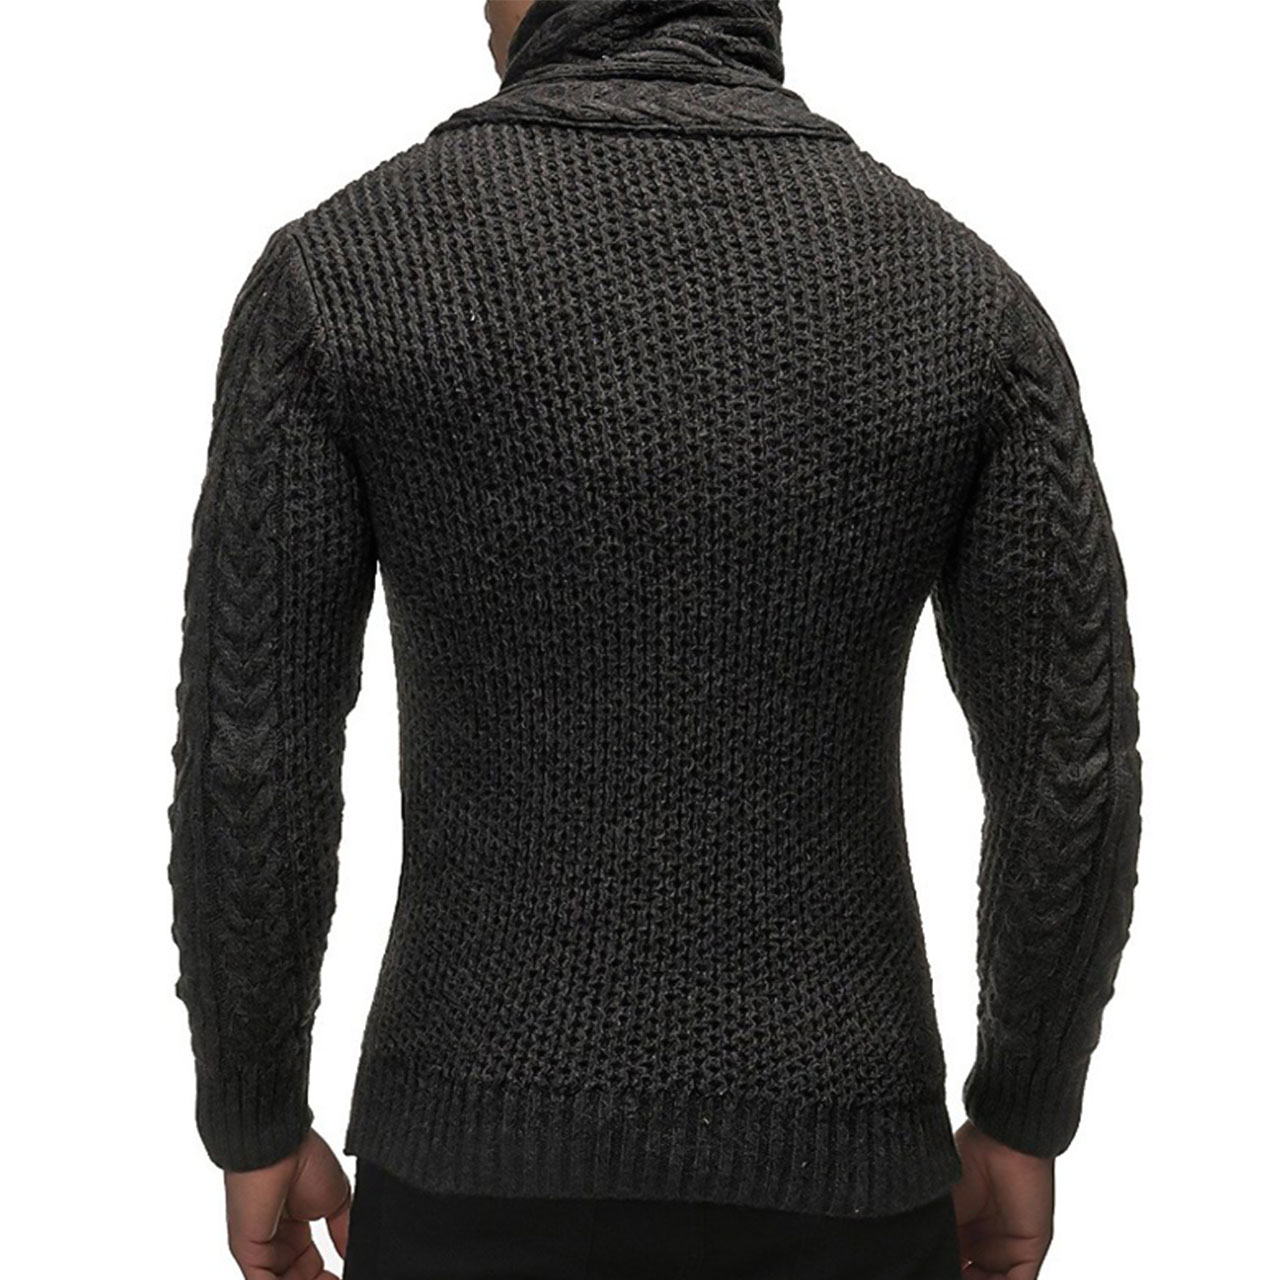 Mens Solid Dark Grey Turtleneck Jumper Going Out Cardigan Sweater Long Sleeve